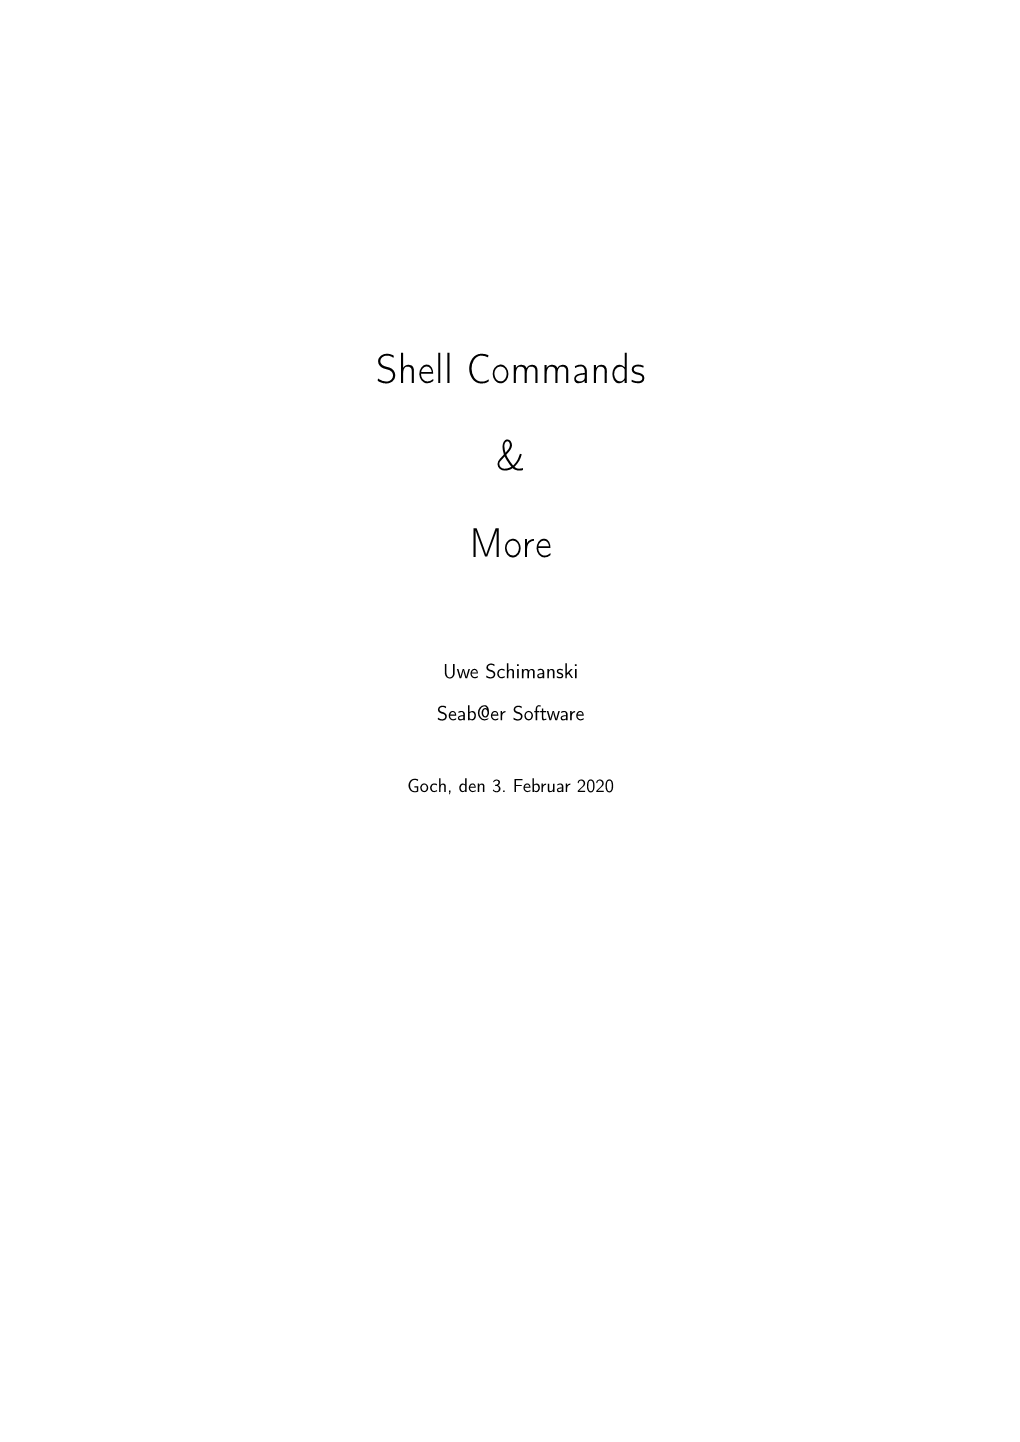 Shell Commands & More